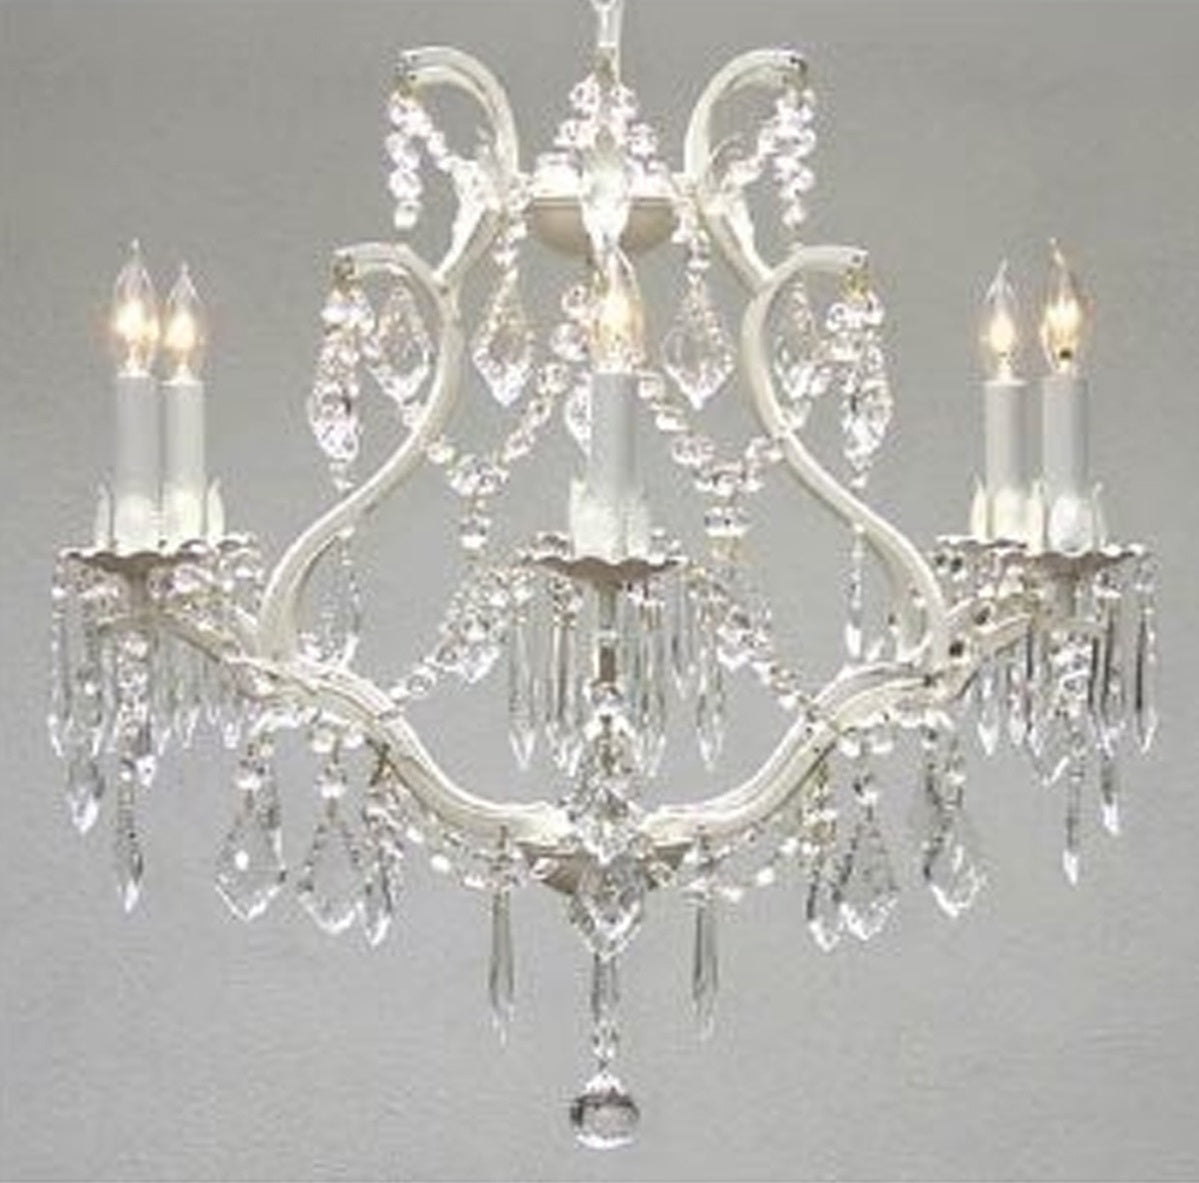 White Wrought Iron Crystal Chandelier Lighting H 19" W 20"